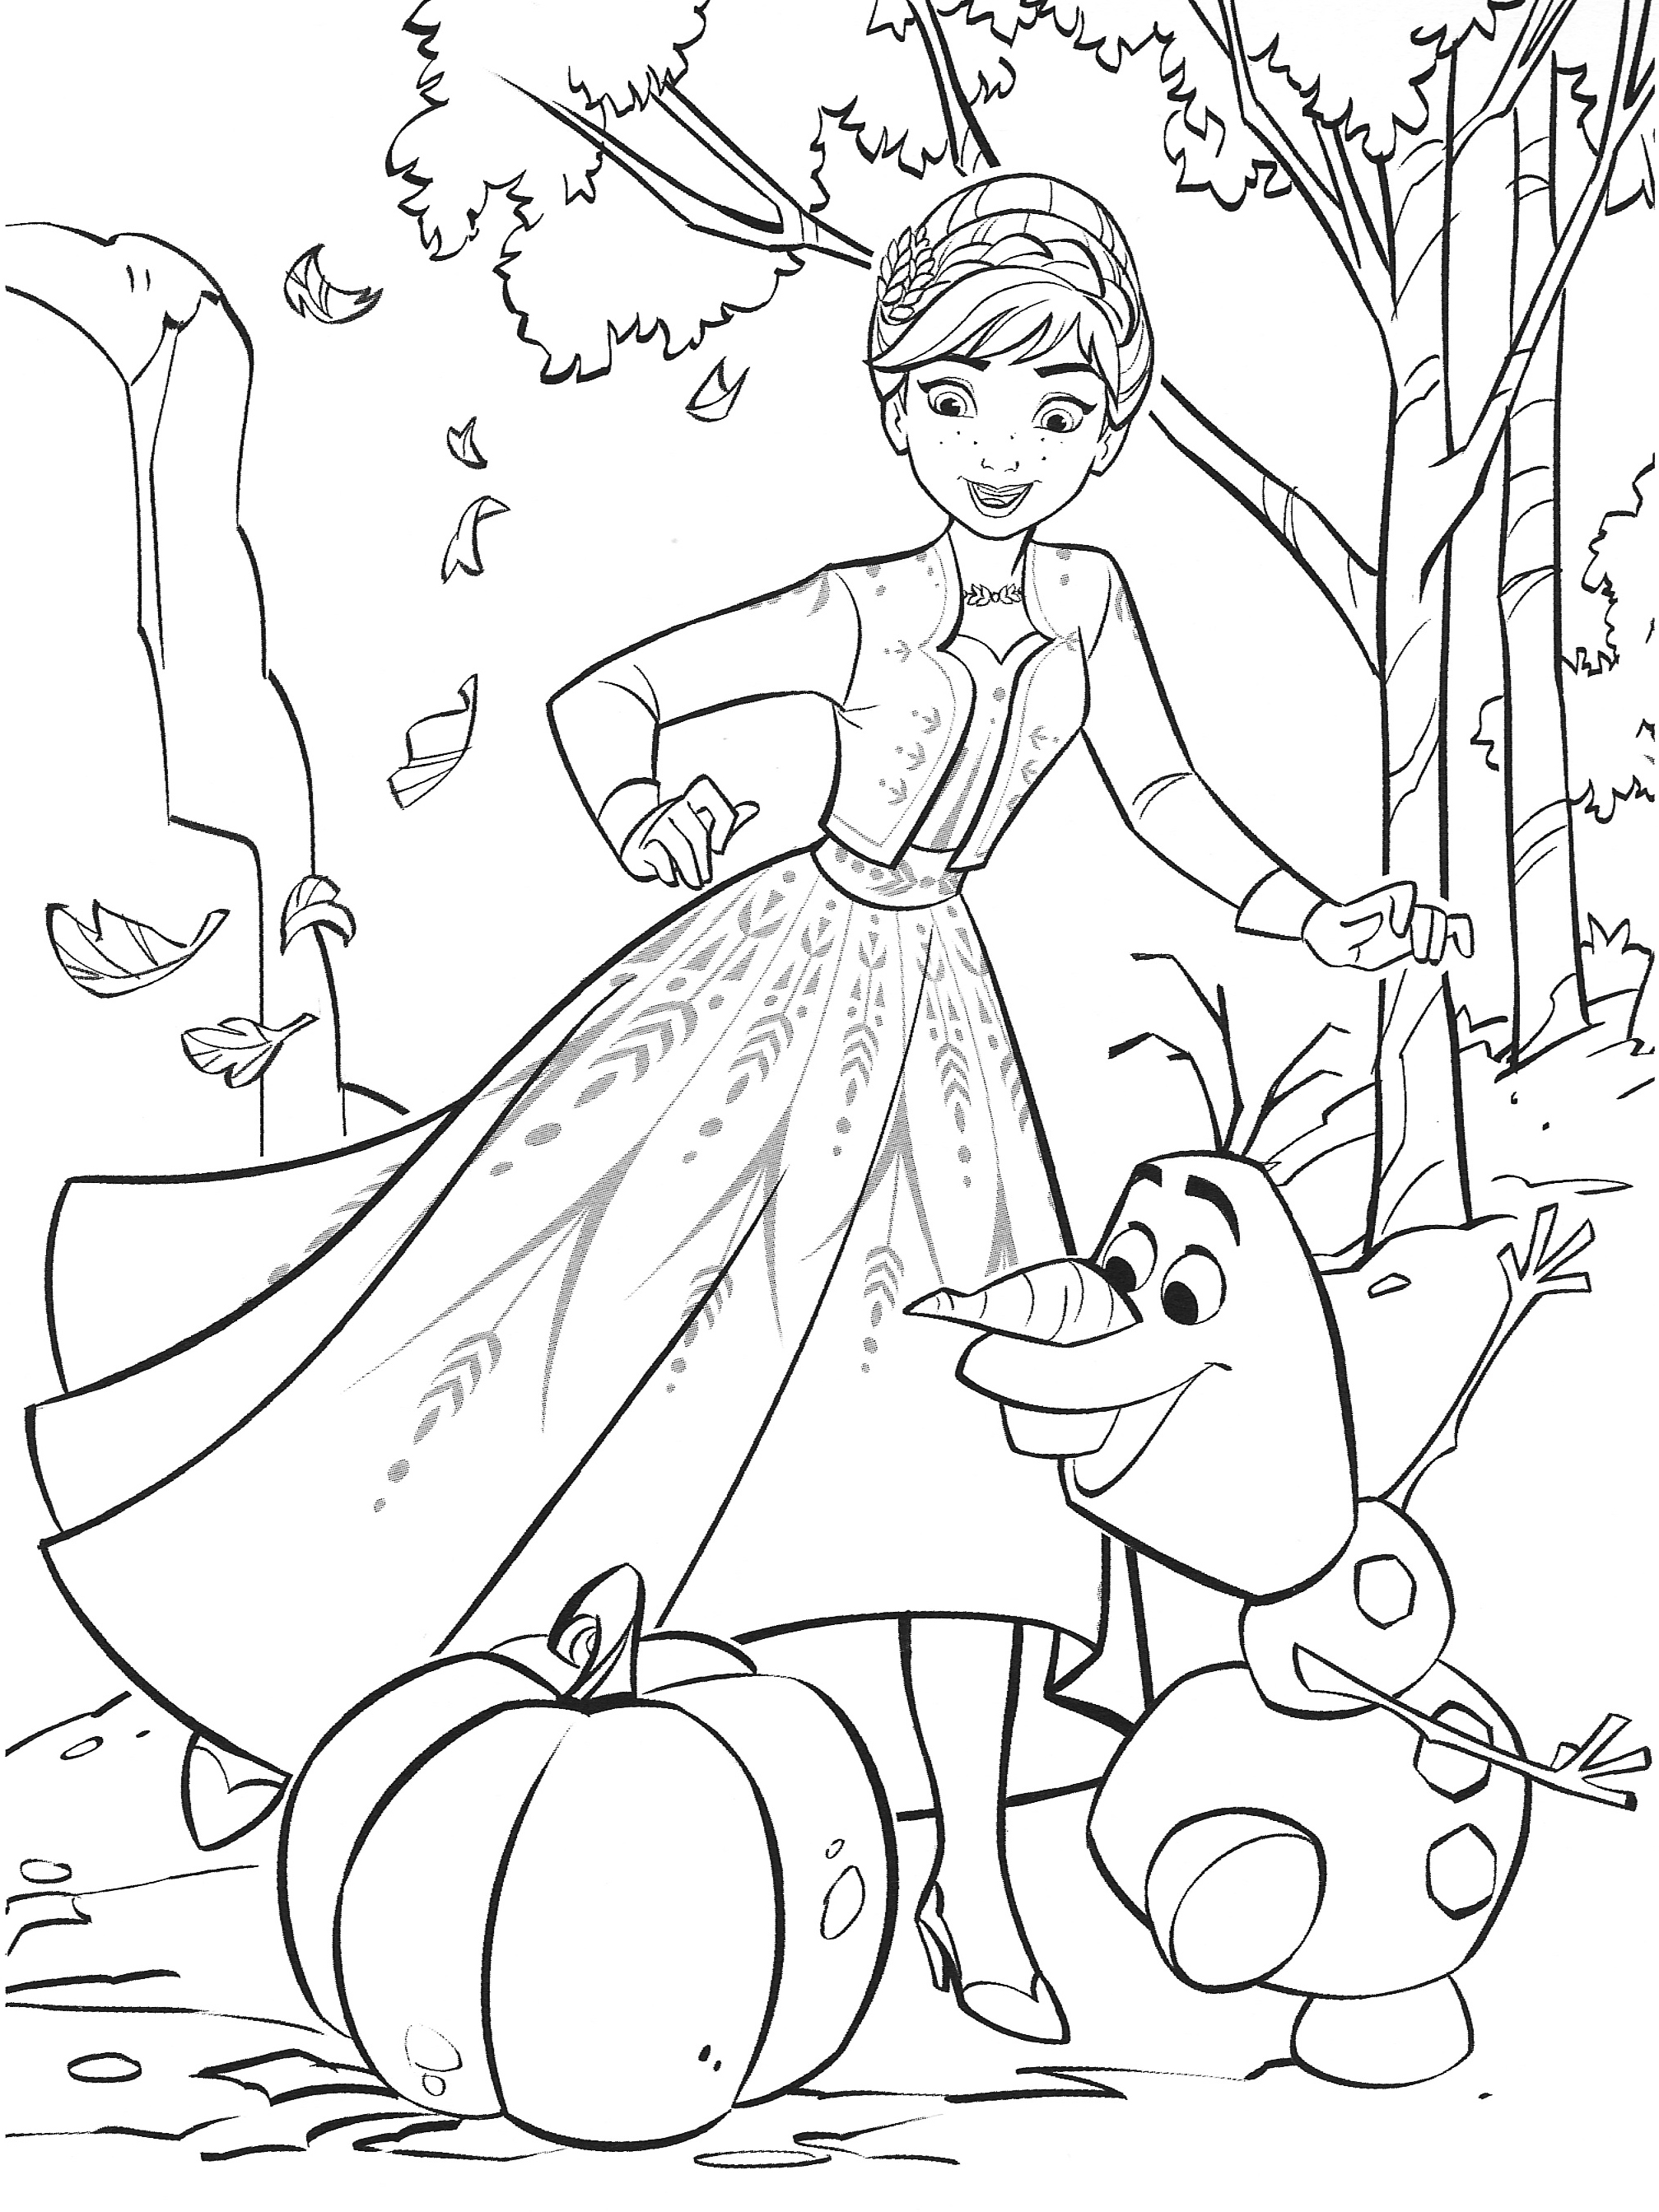 New Frozen 2 coloring pages with Anna